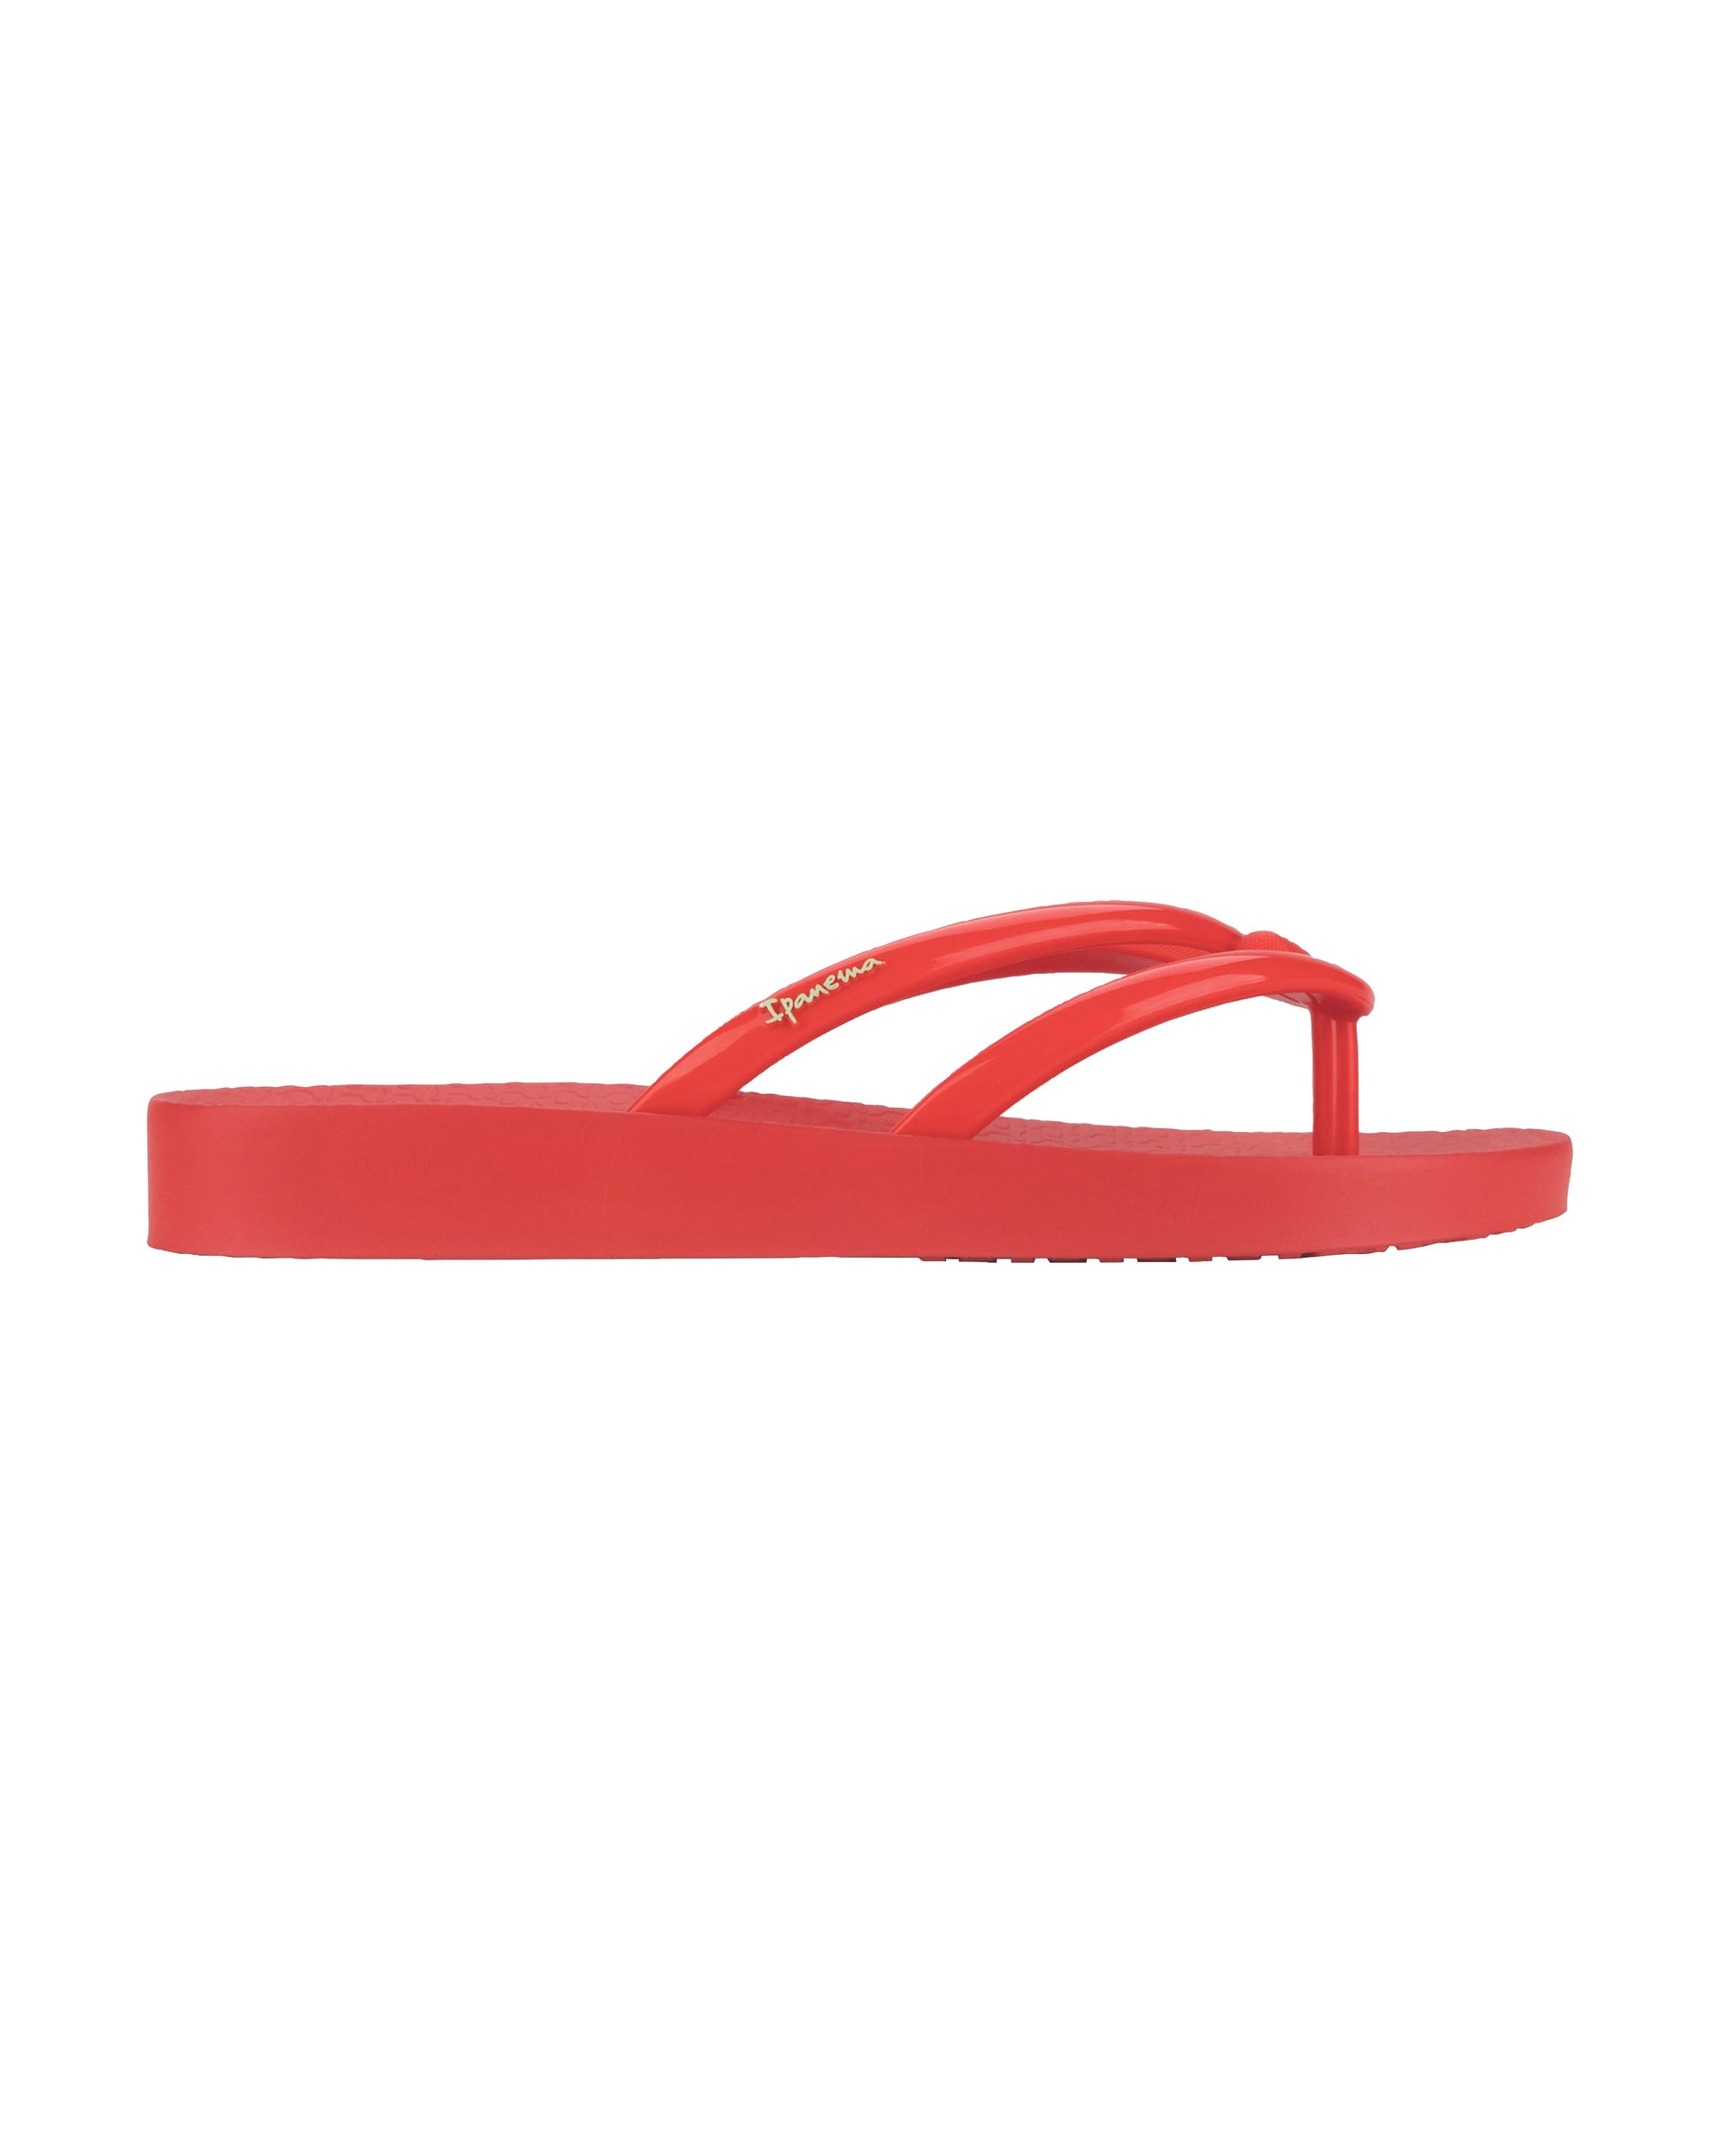 Outer side view of a red Ipanema Comfy women's flip flop.